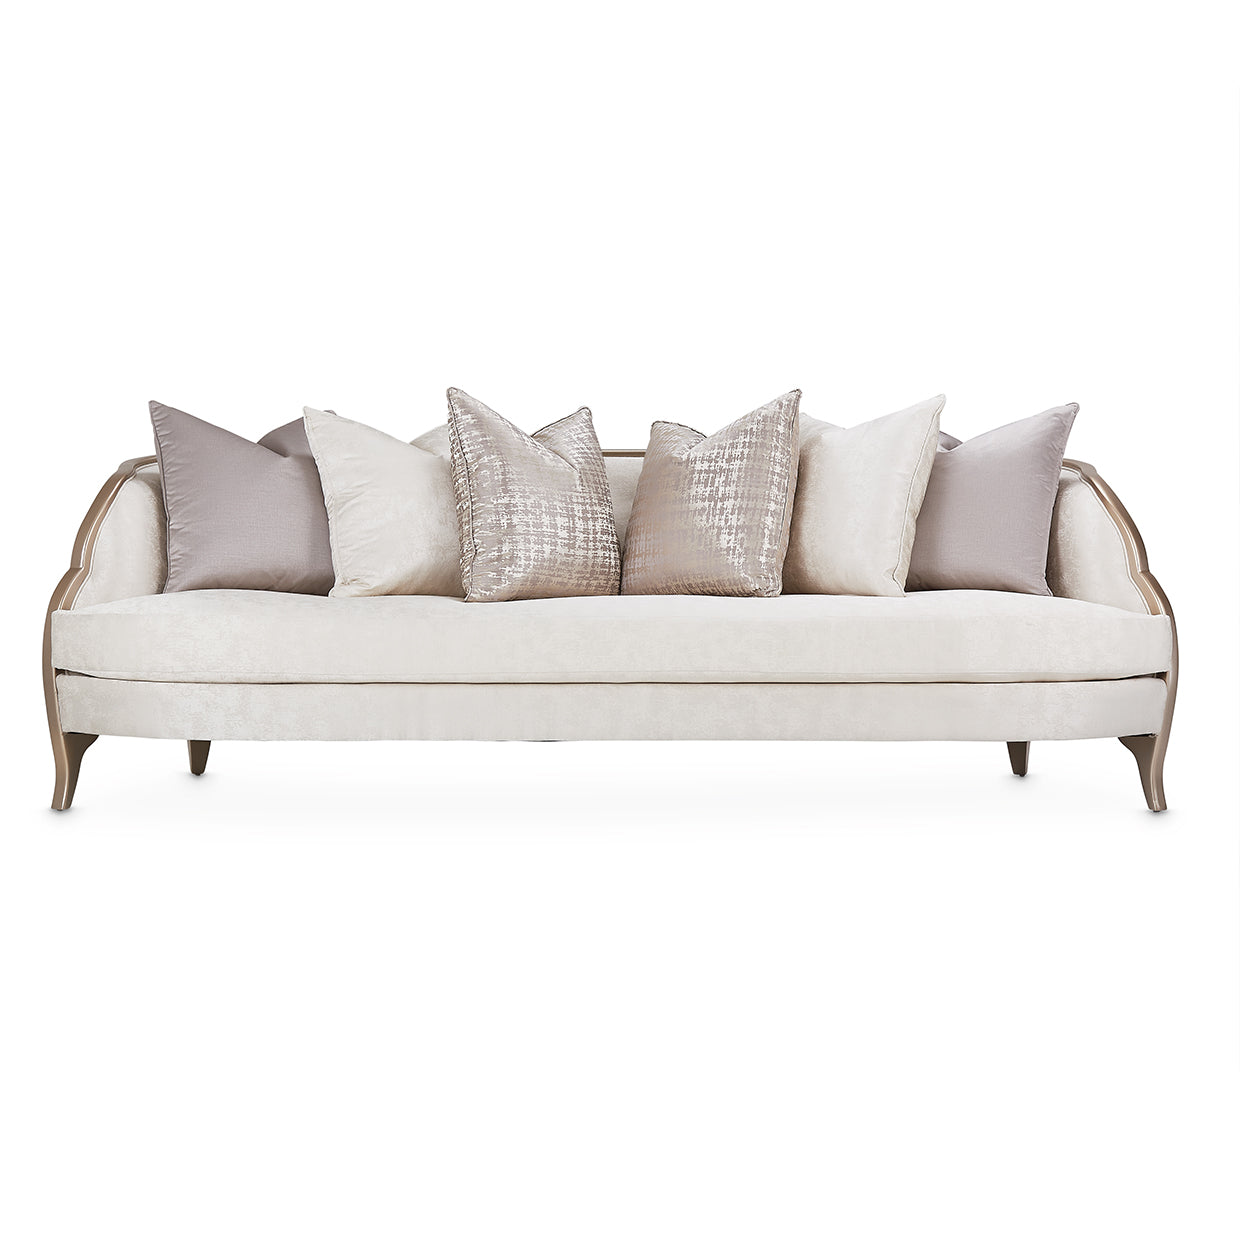 MalibuCrest Sofa, Romance-inspired sofa, Curved sofa design, V-notch arms, Chardonnay finish, Cloud White upholstery, Tonal marble jacquard fabric, Softly textured seat, Winged sides, Accent pillows included, Home atmosphere enhancement, Elegant sofa, Living room centerpiece, Comfortable seating, Stylish sofa design, dream art, Michael amini